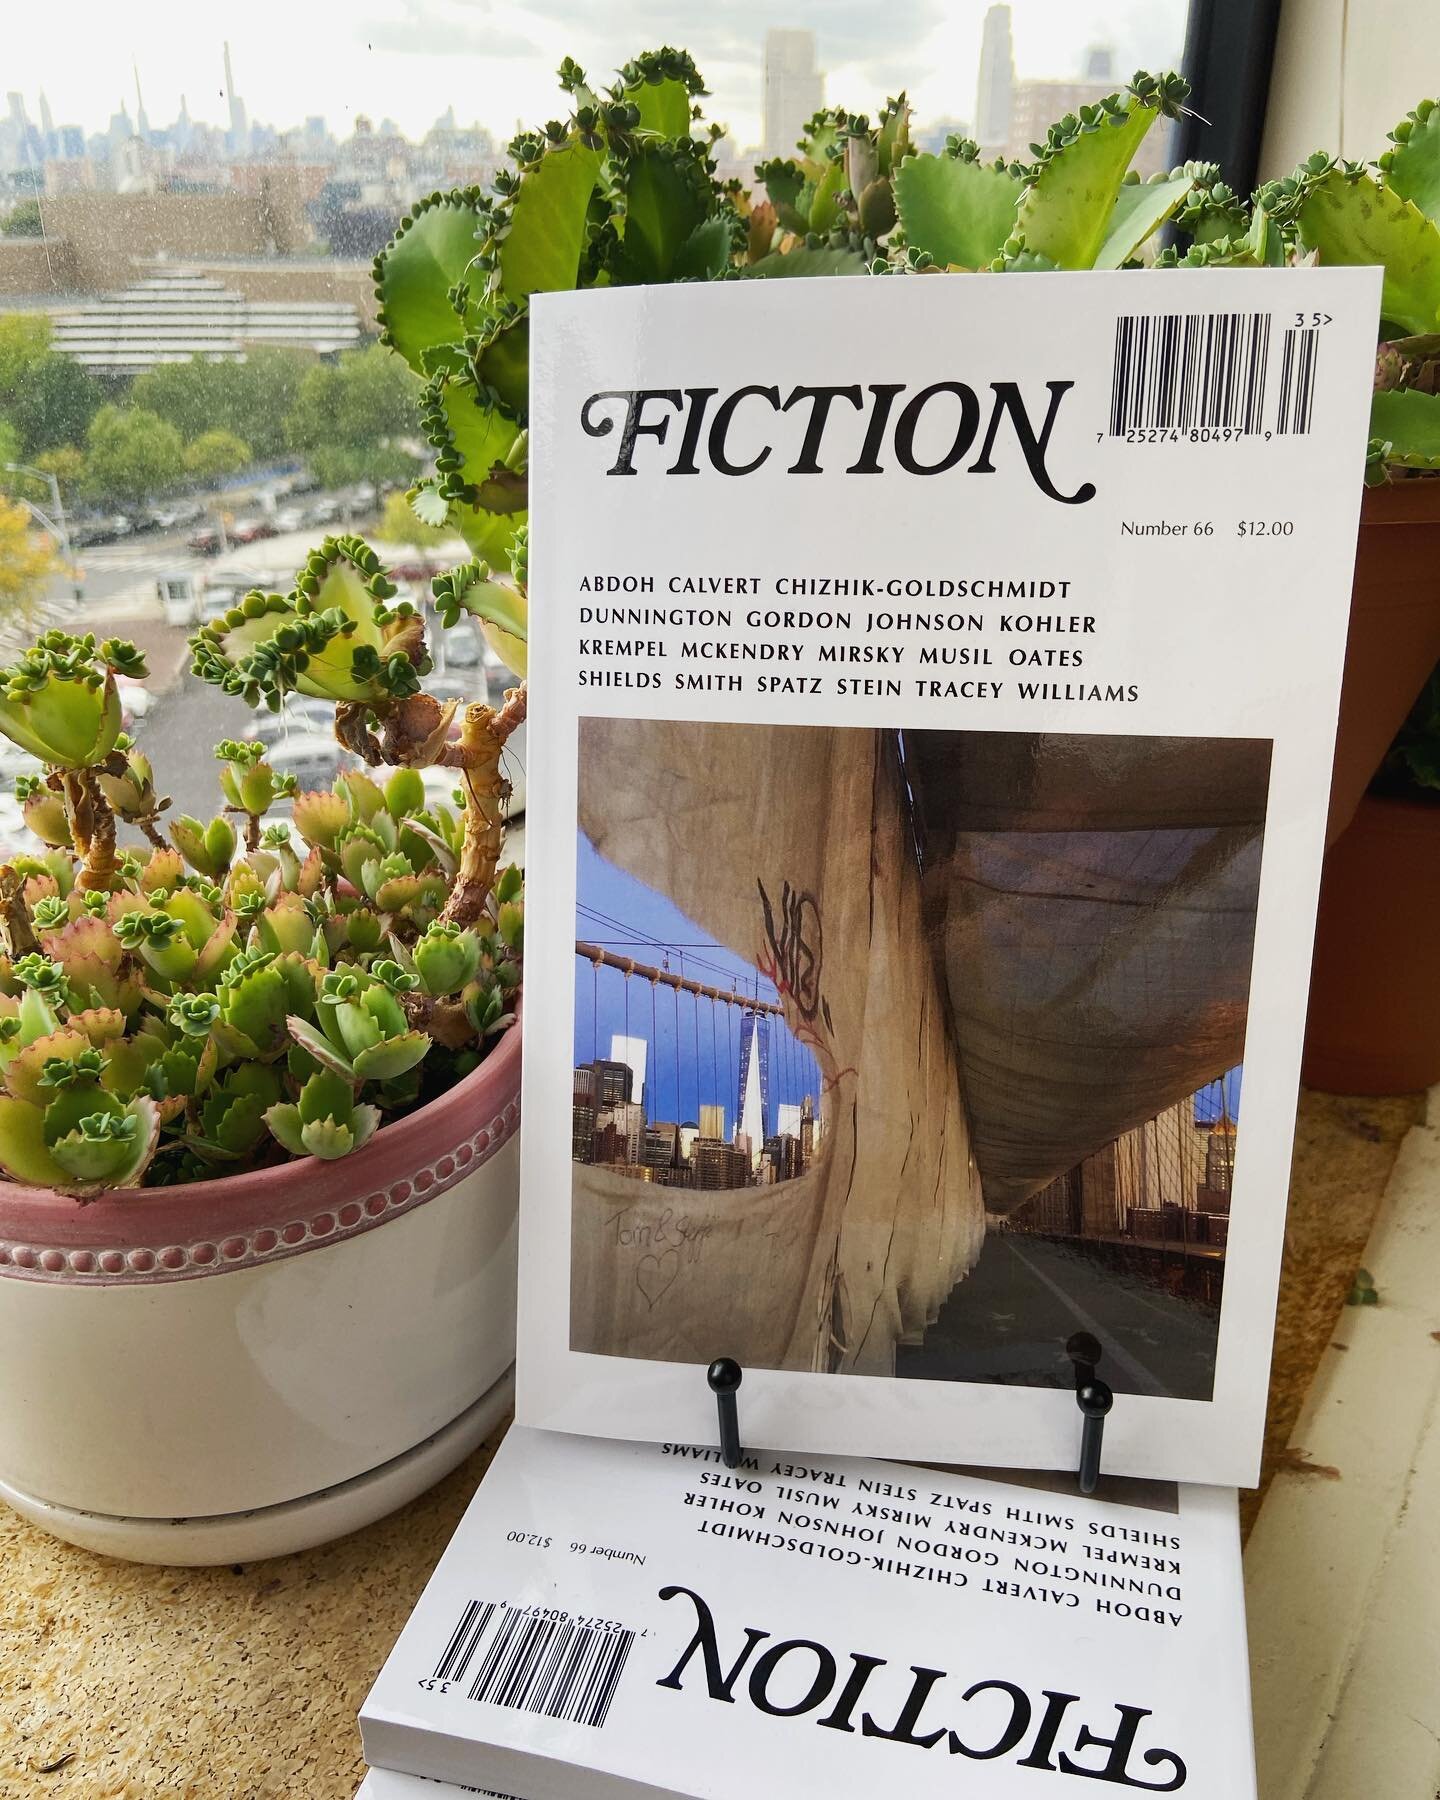 IT HAS ARRIVED!
Come get your ISSUE 66 at https://www.fictioninc.com/issues/no66
.
.
.
#fictionmag #pubday #publishing #bookstagram #printpublication #litjournal #literarymagazine #literarymag #litmag 
#currentlyreading #currentissue #shortfiction #l